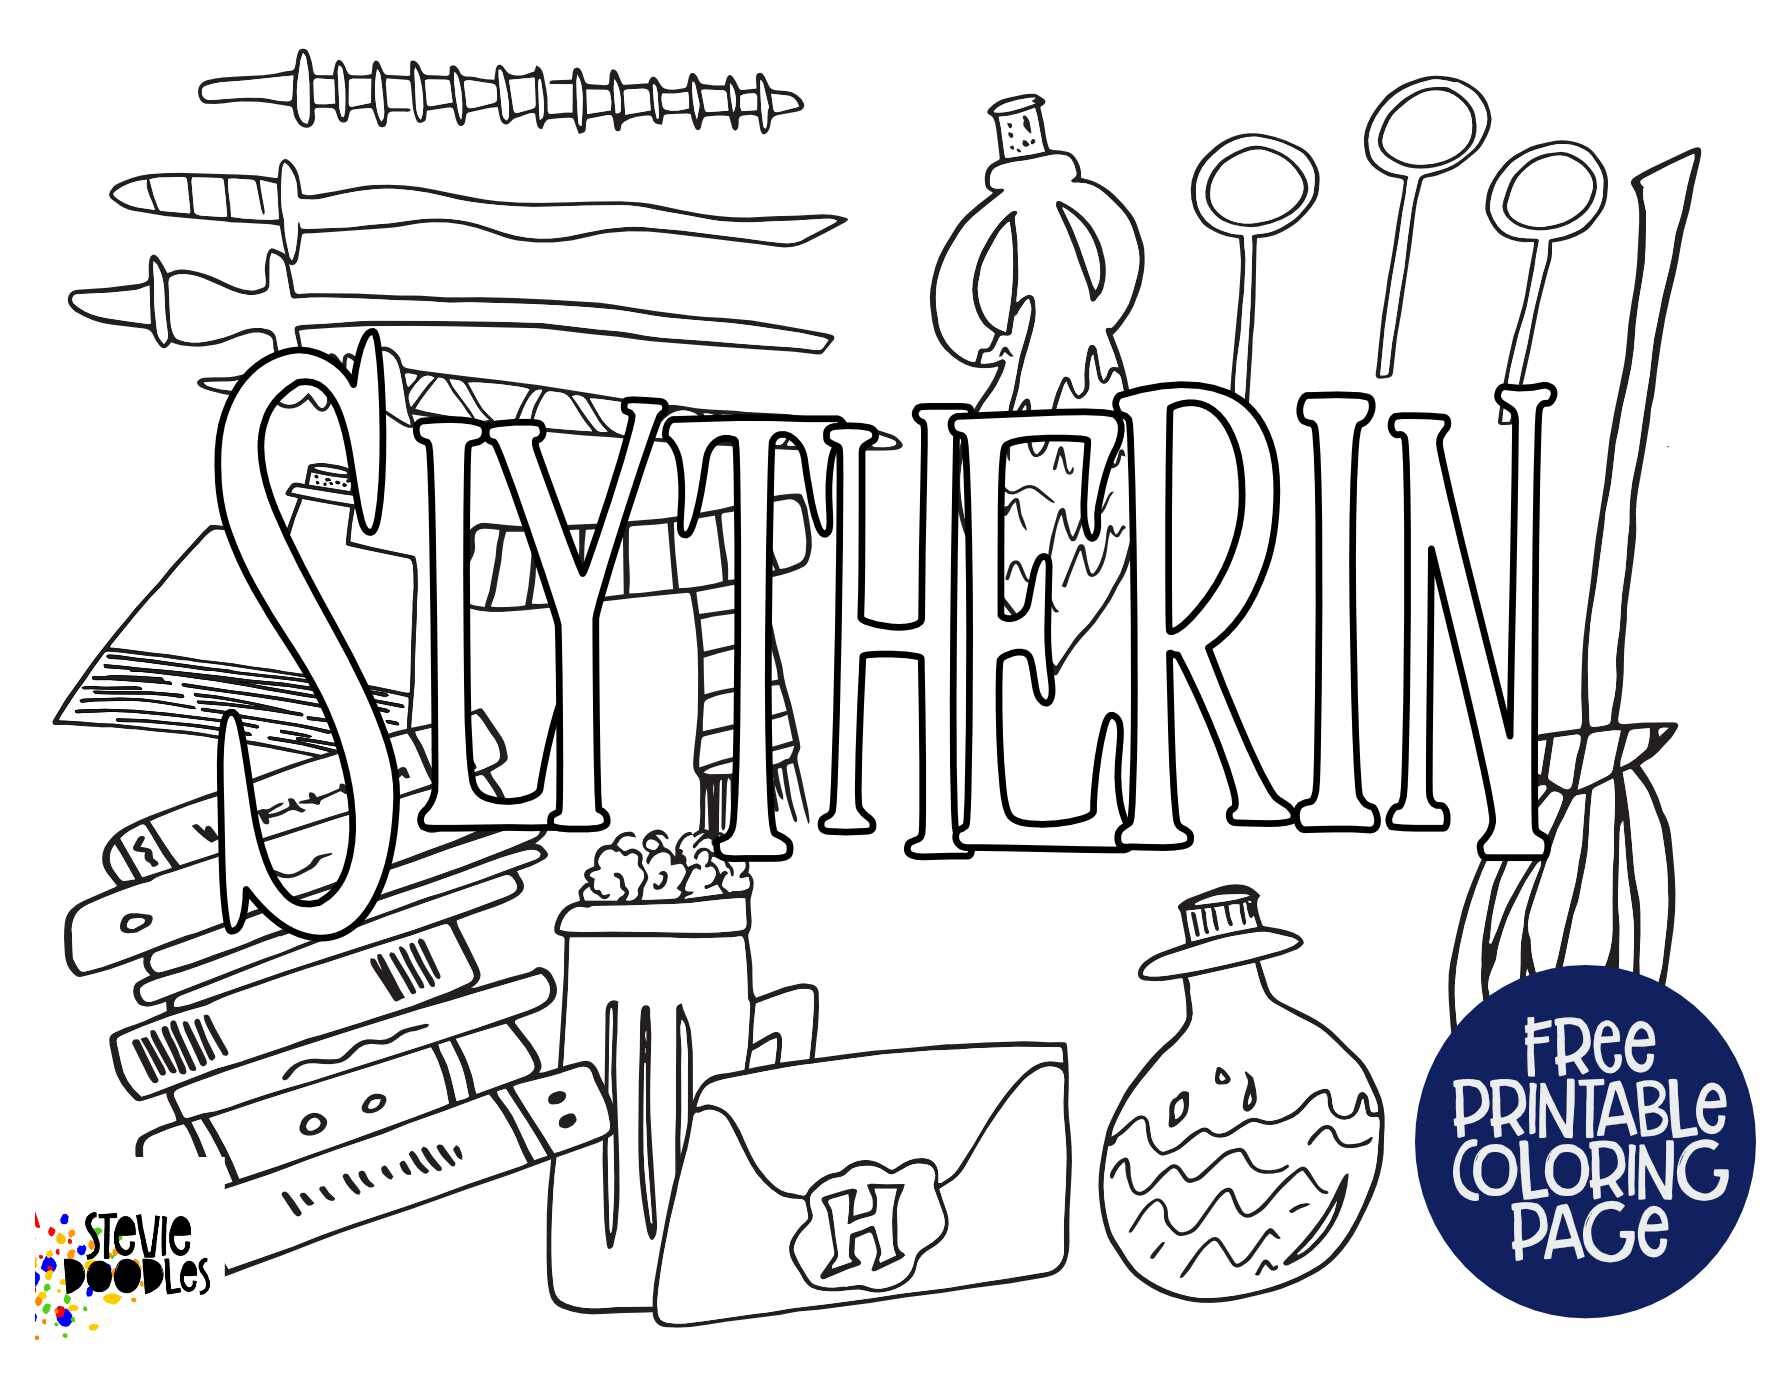 Slytherin - Free Coloring Page - Harry Potter  Over 1000 free coloring pages at Stevie Doodles